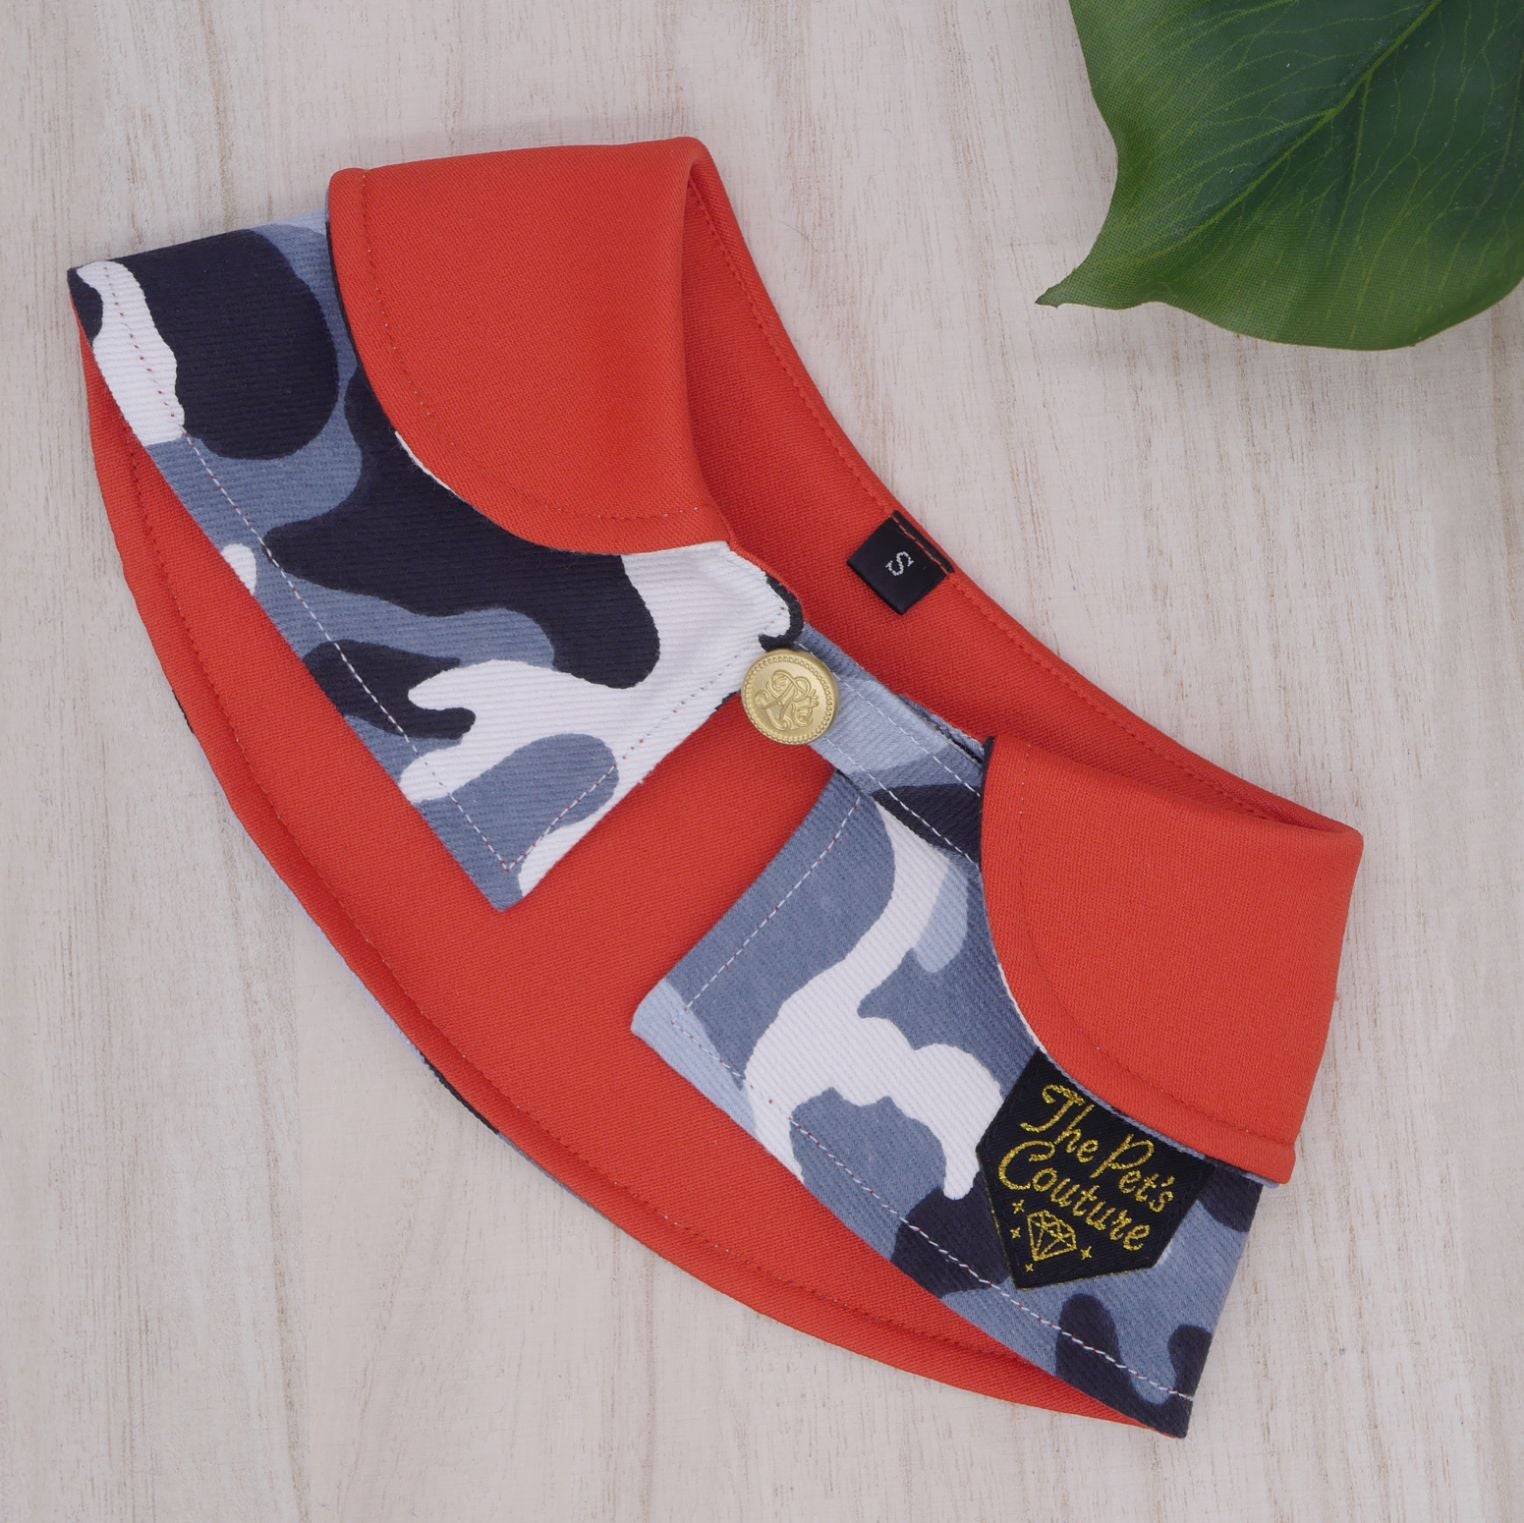 Capes - Urban Ranger (Army Camo) - The Pet's Couture